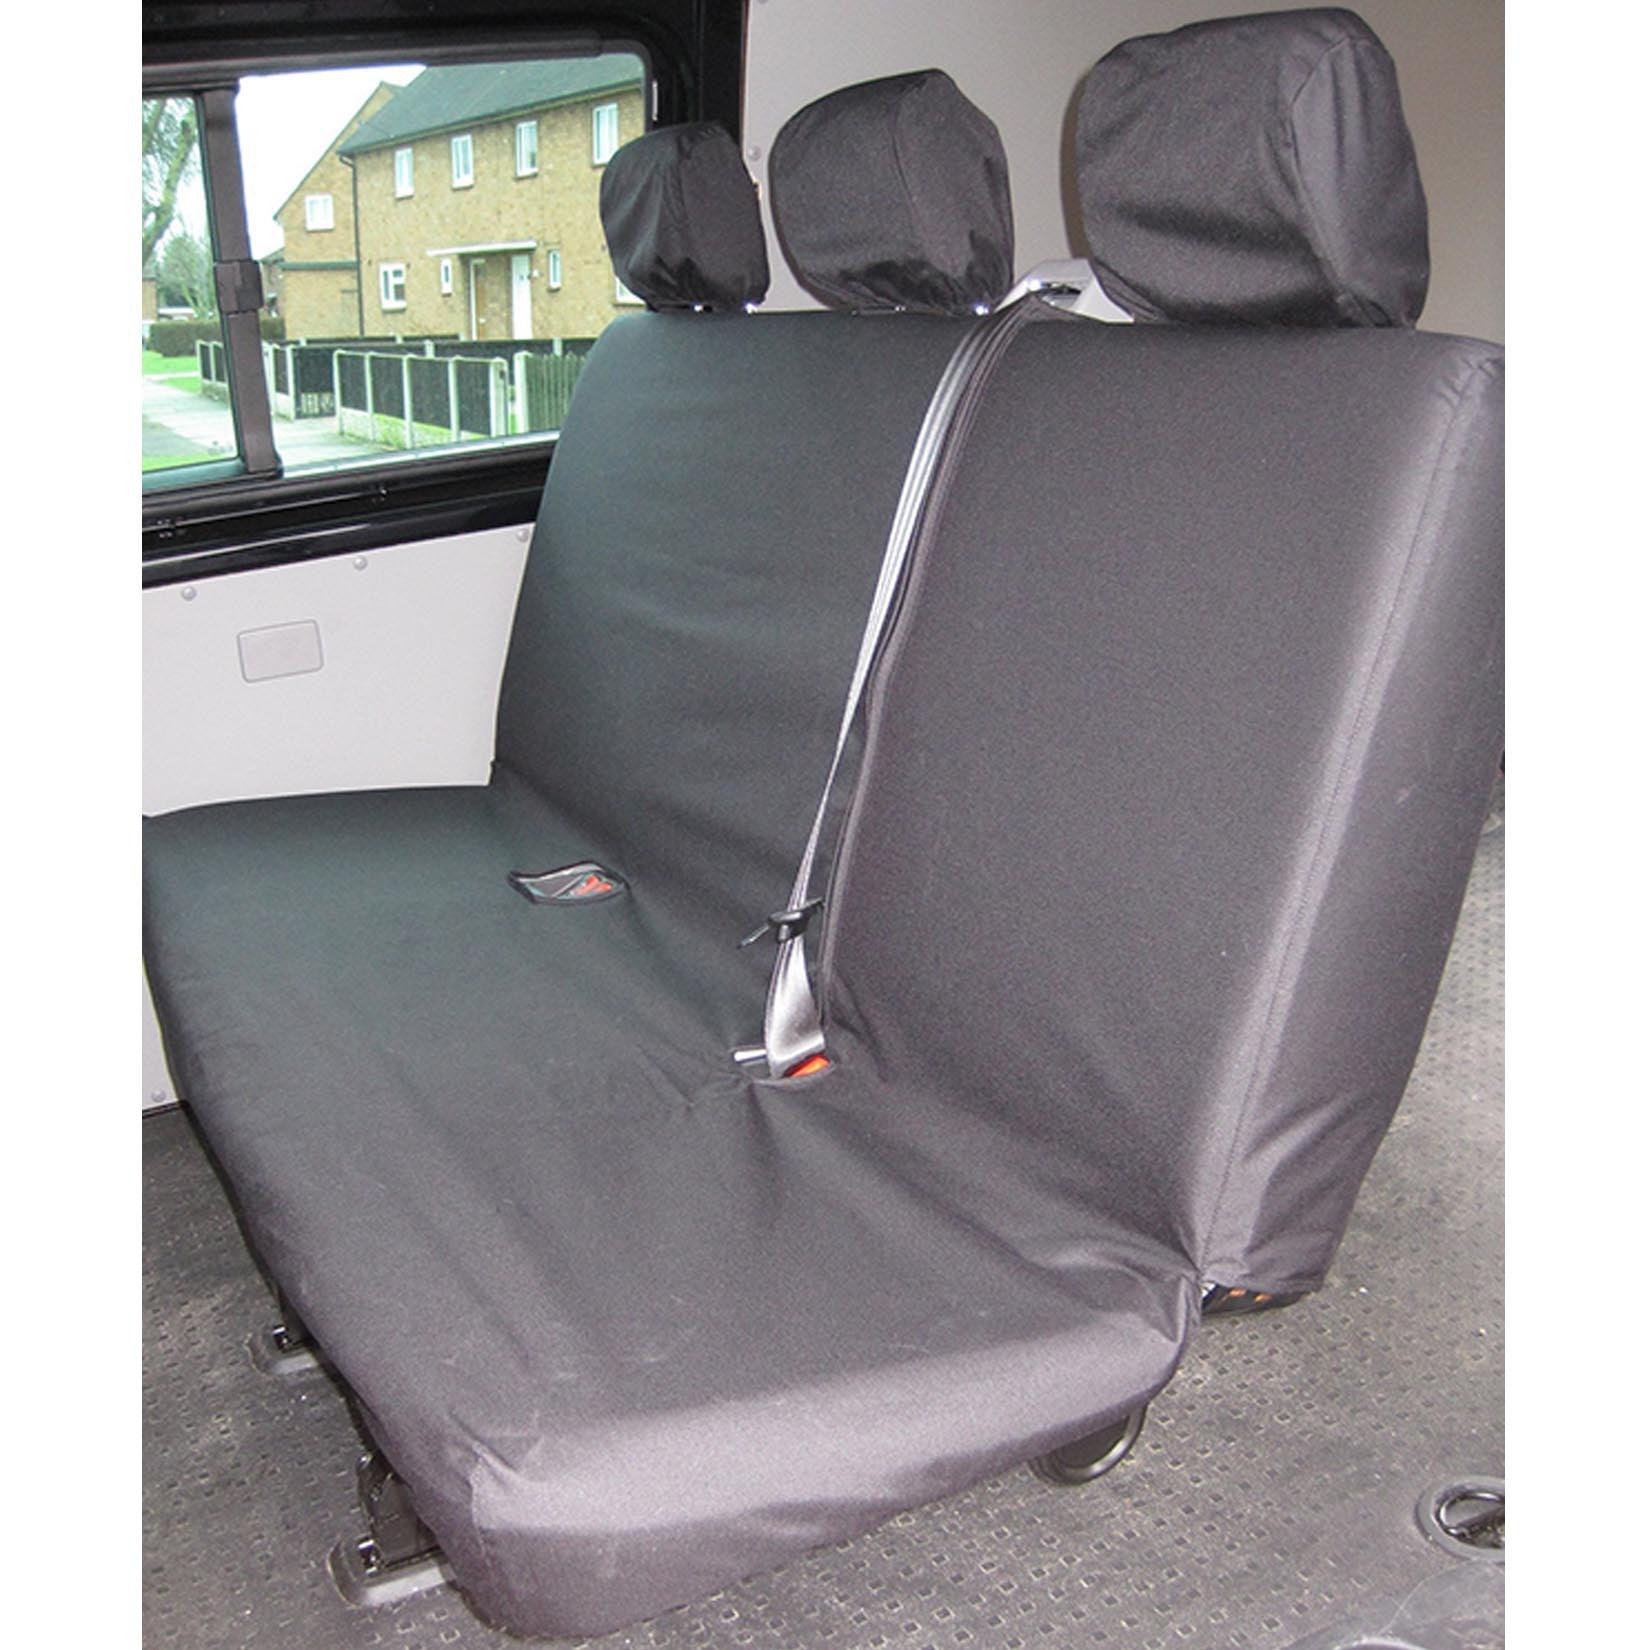 VW TRANSPORTER T5 2003-2009 REAR BENCH SEAT COVERS – BLACK - Storm Xccessories2